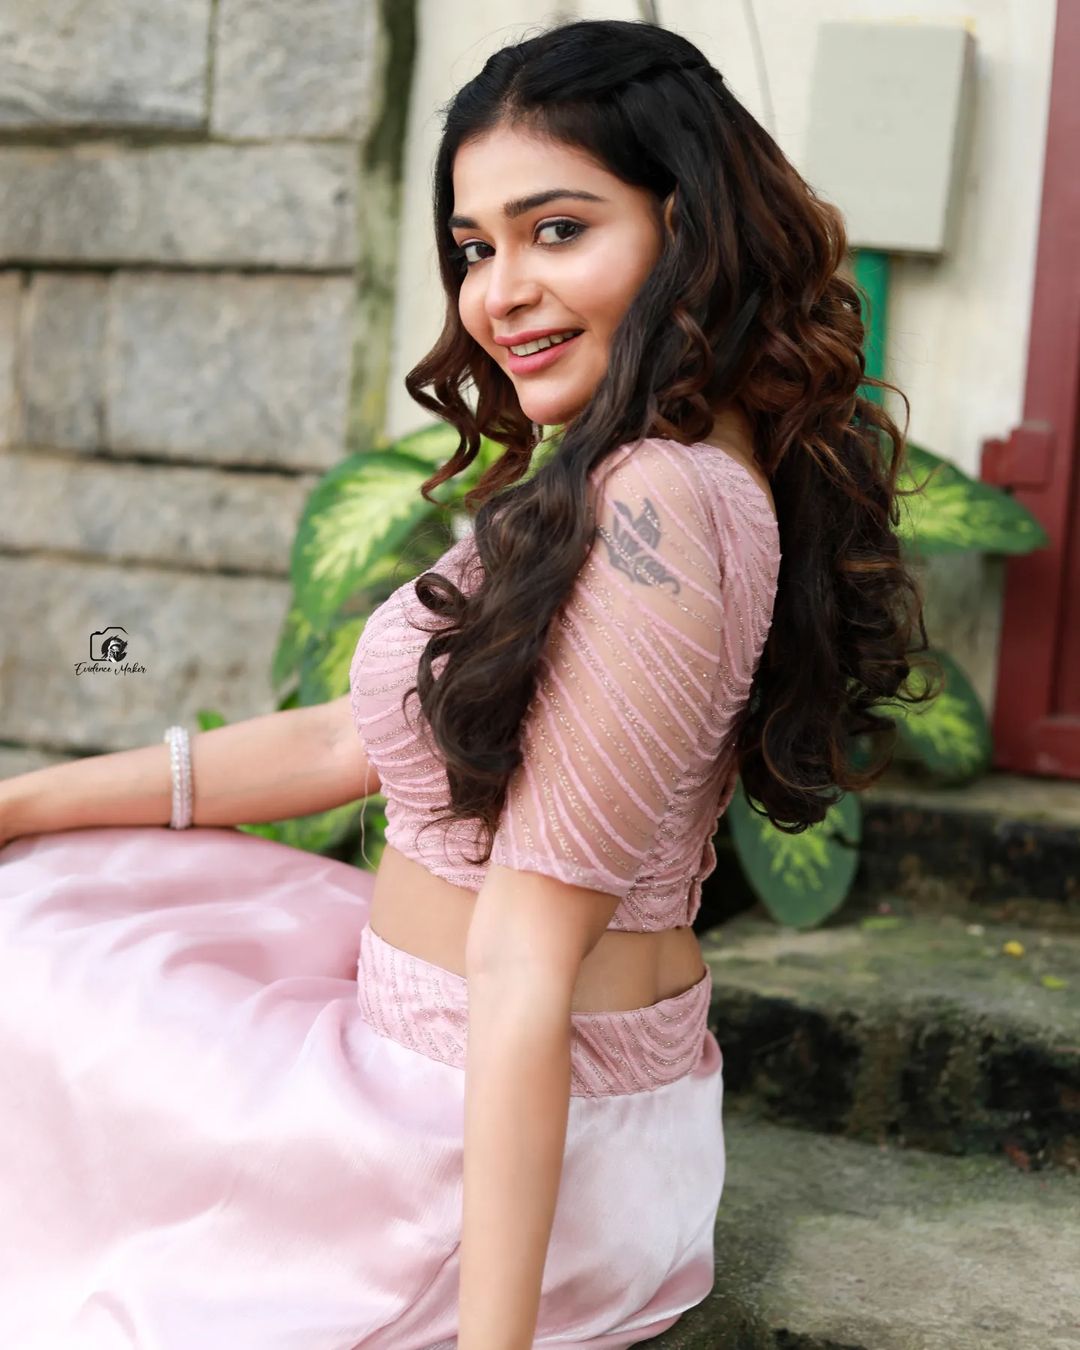 dharsha gupta hot photos and video in pink dress getting viral on social media